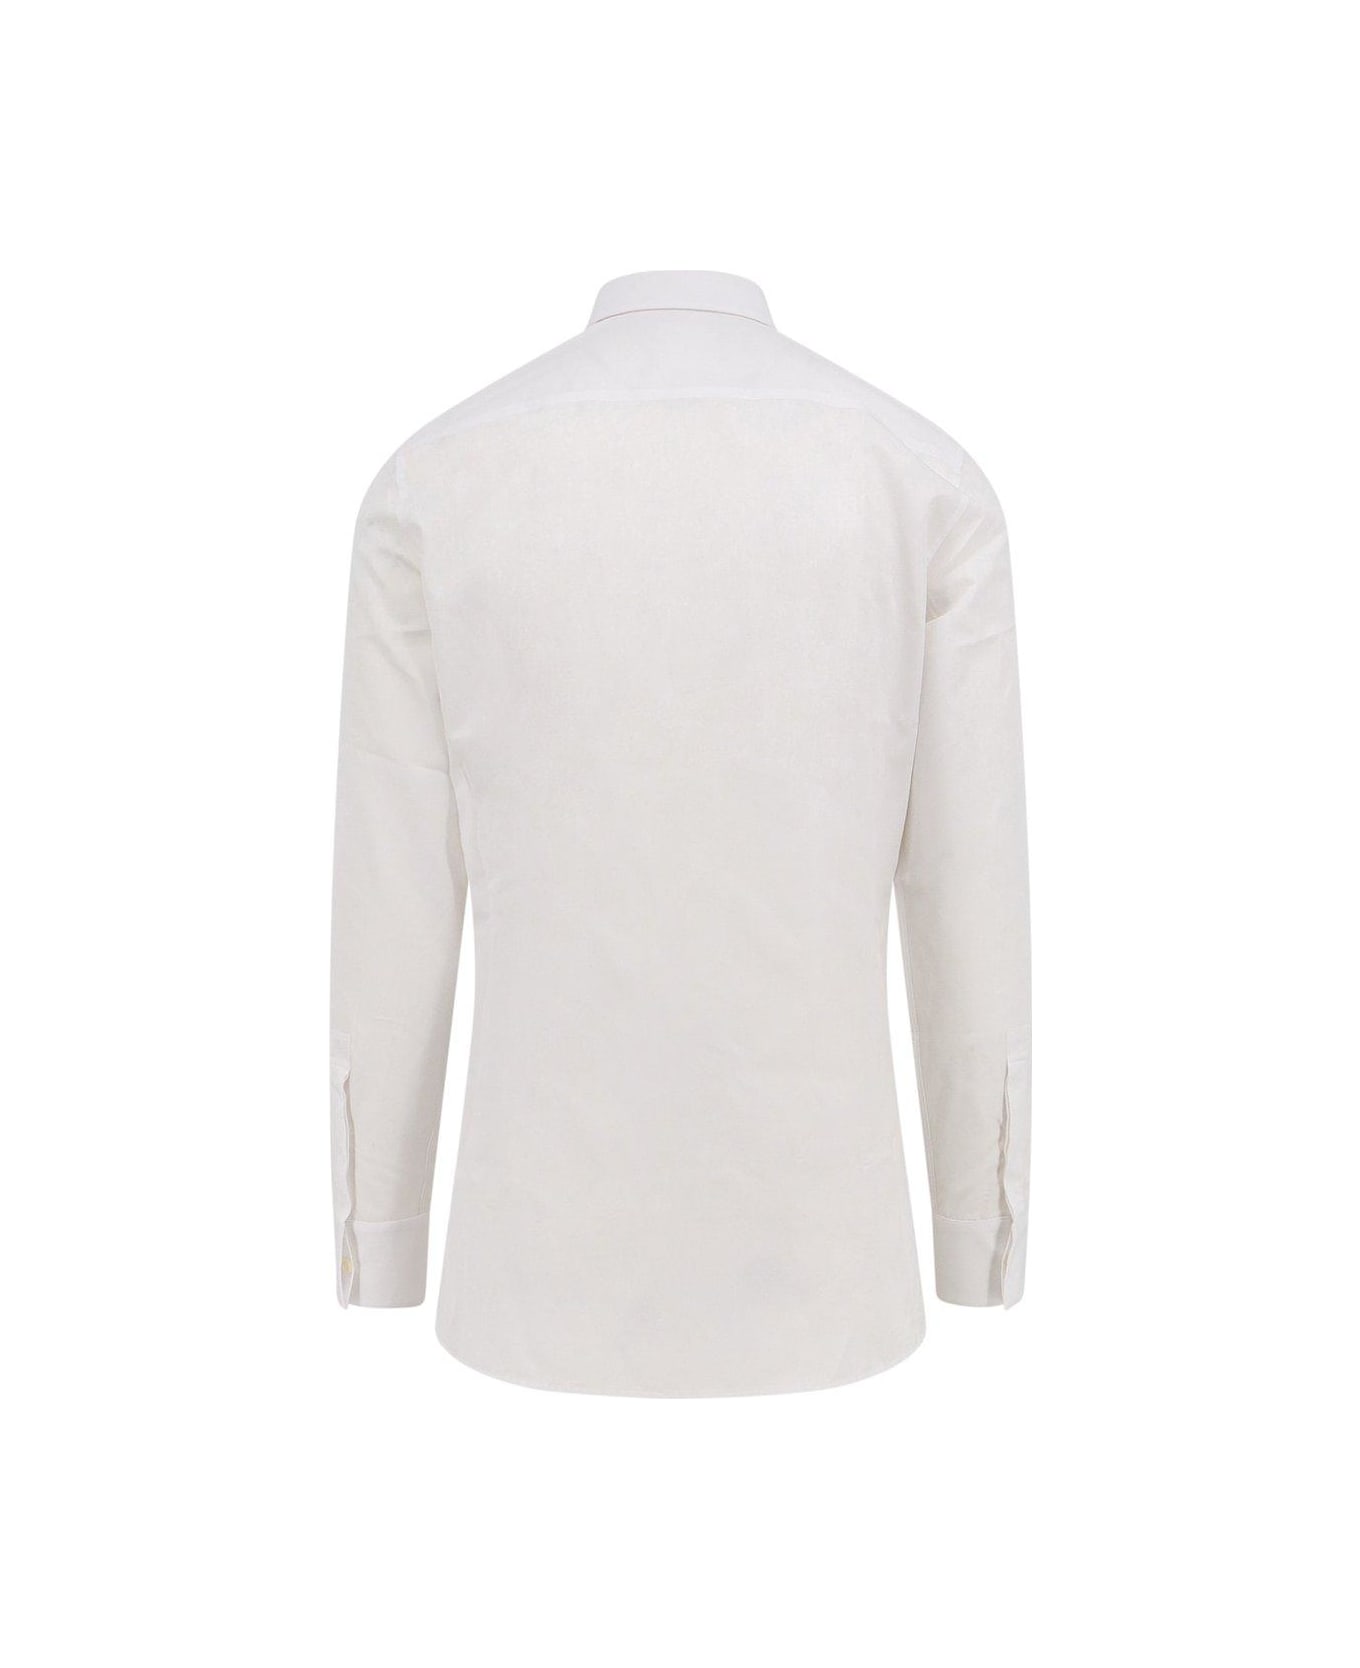 Givenchy Embroidered Long-sleeved Shirt - White シャツ